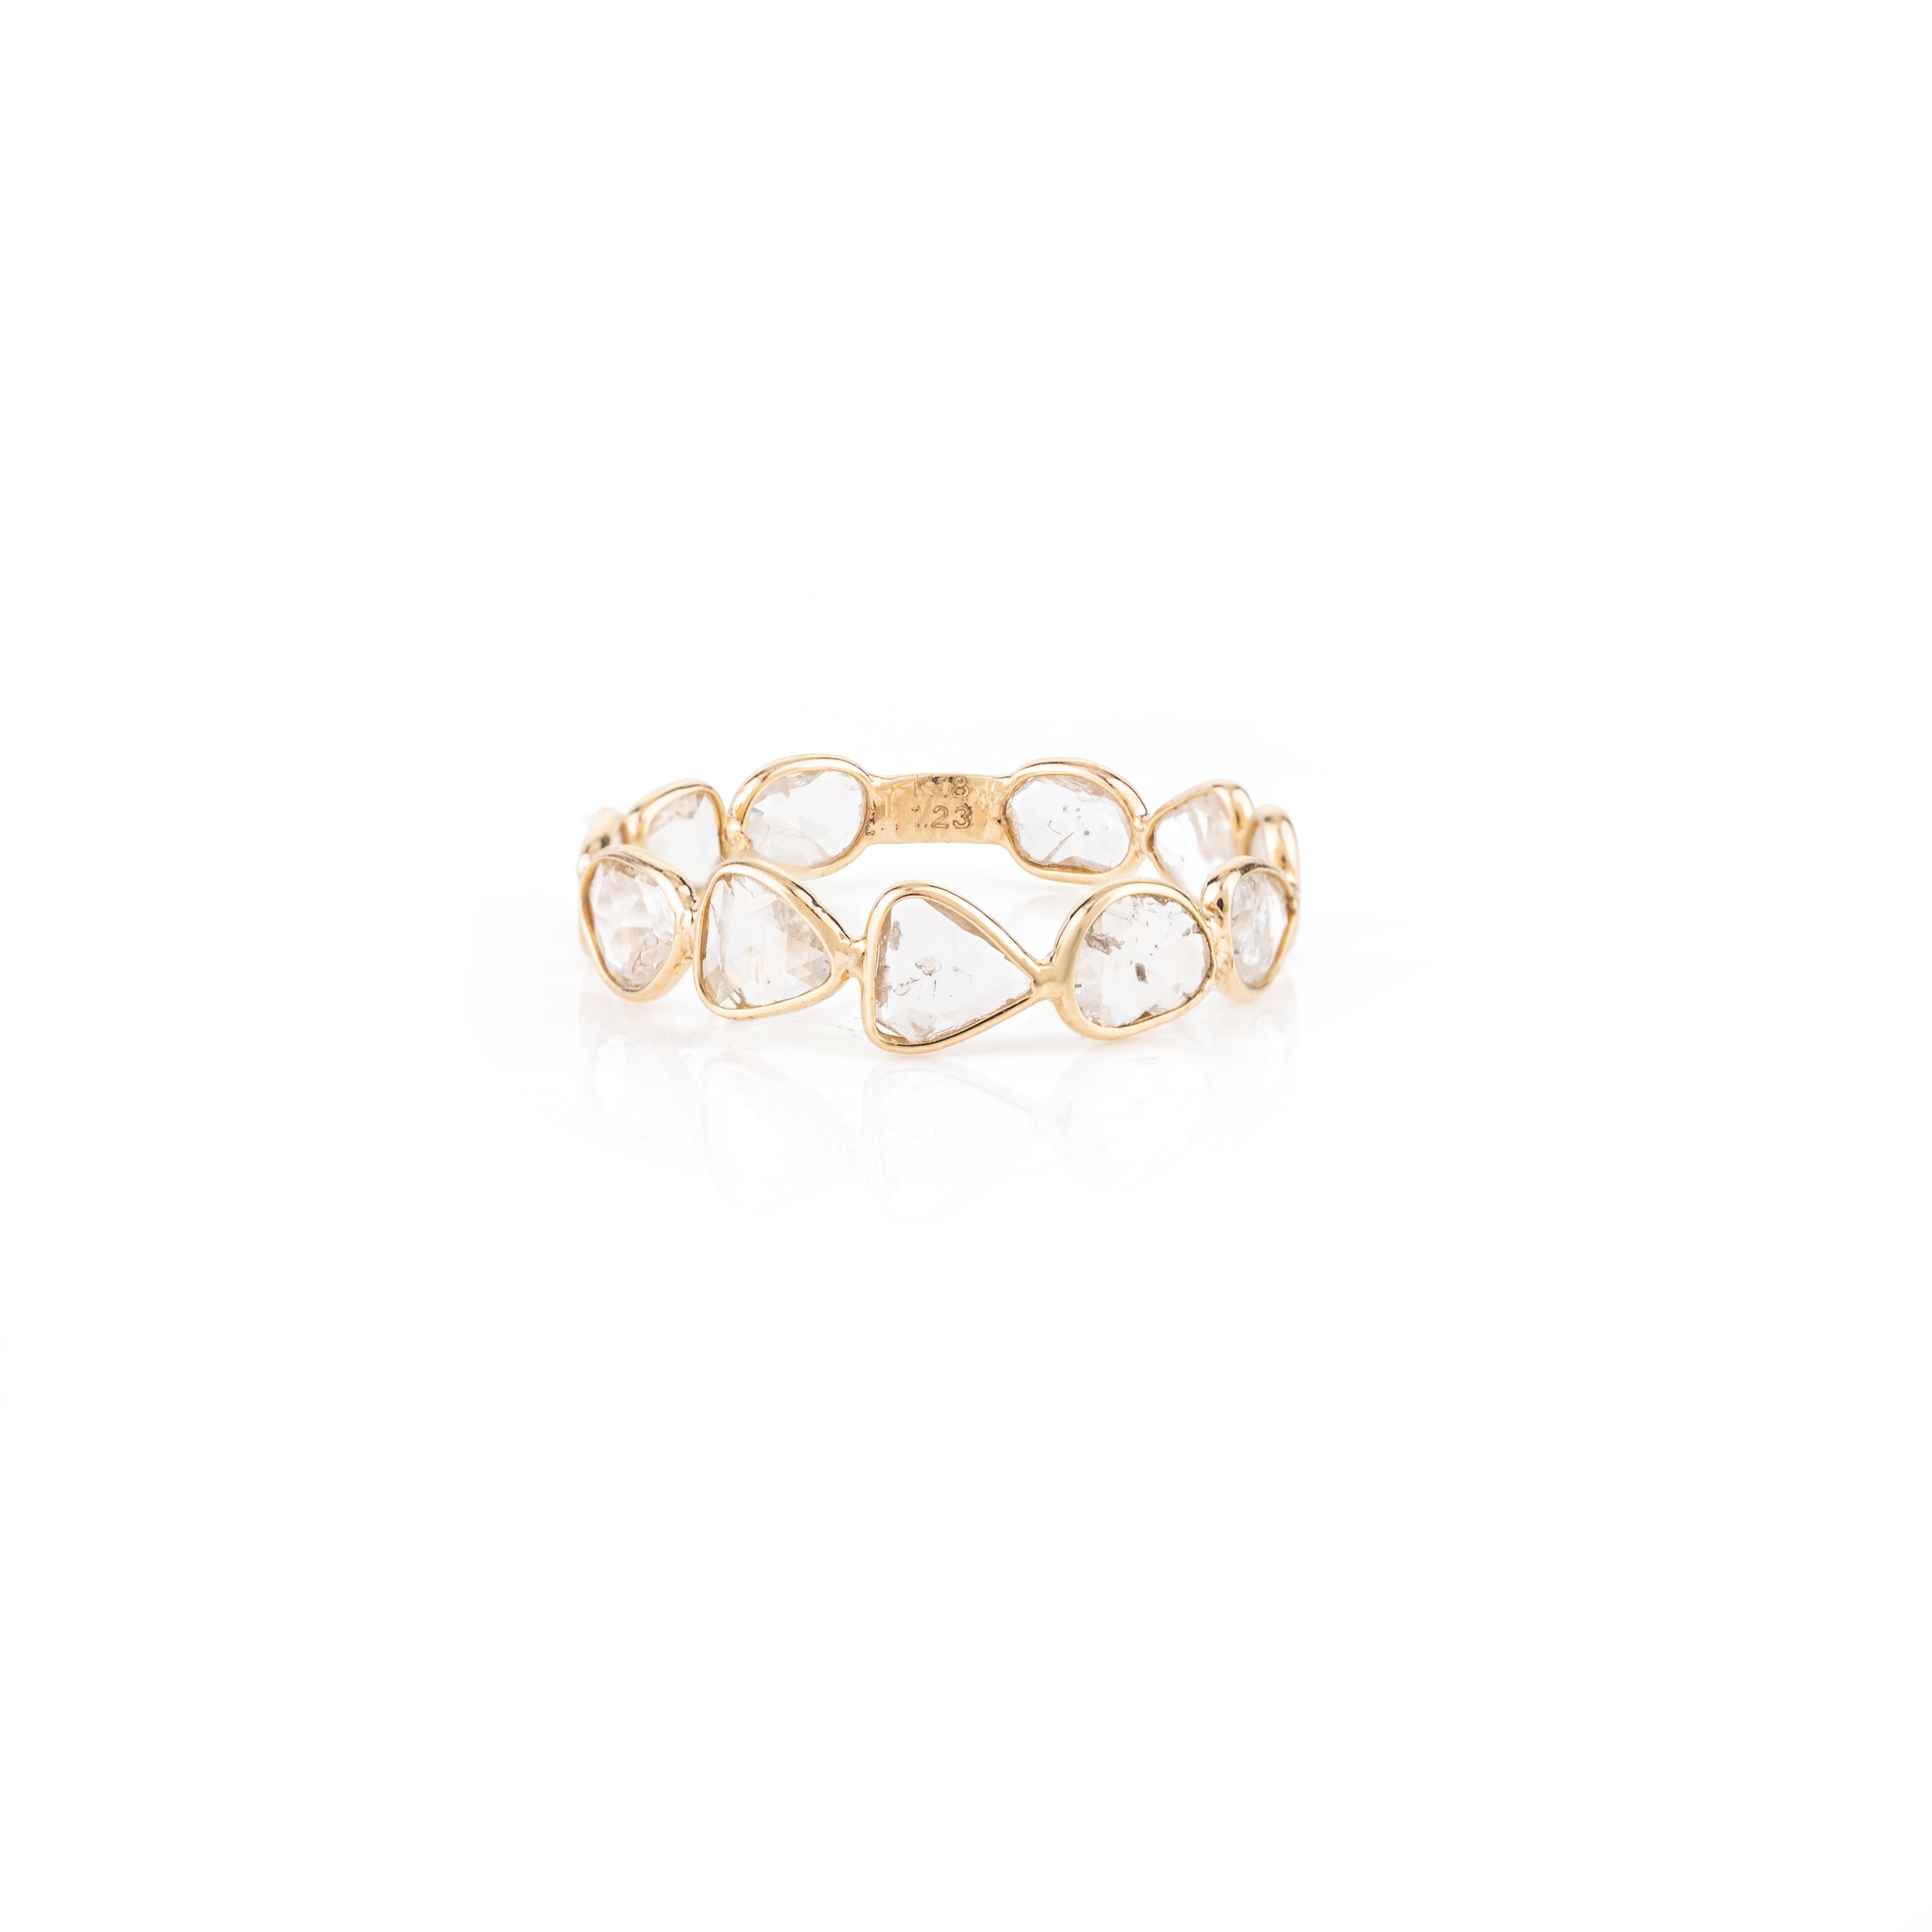 For Sale:  Natural Uncut Diamond 18k Yellow Gold Stacking Band Ring Gift for Her 8